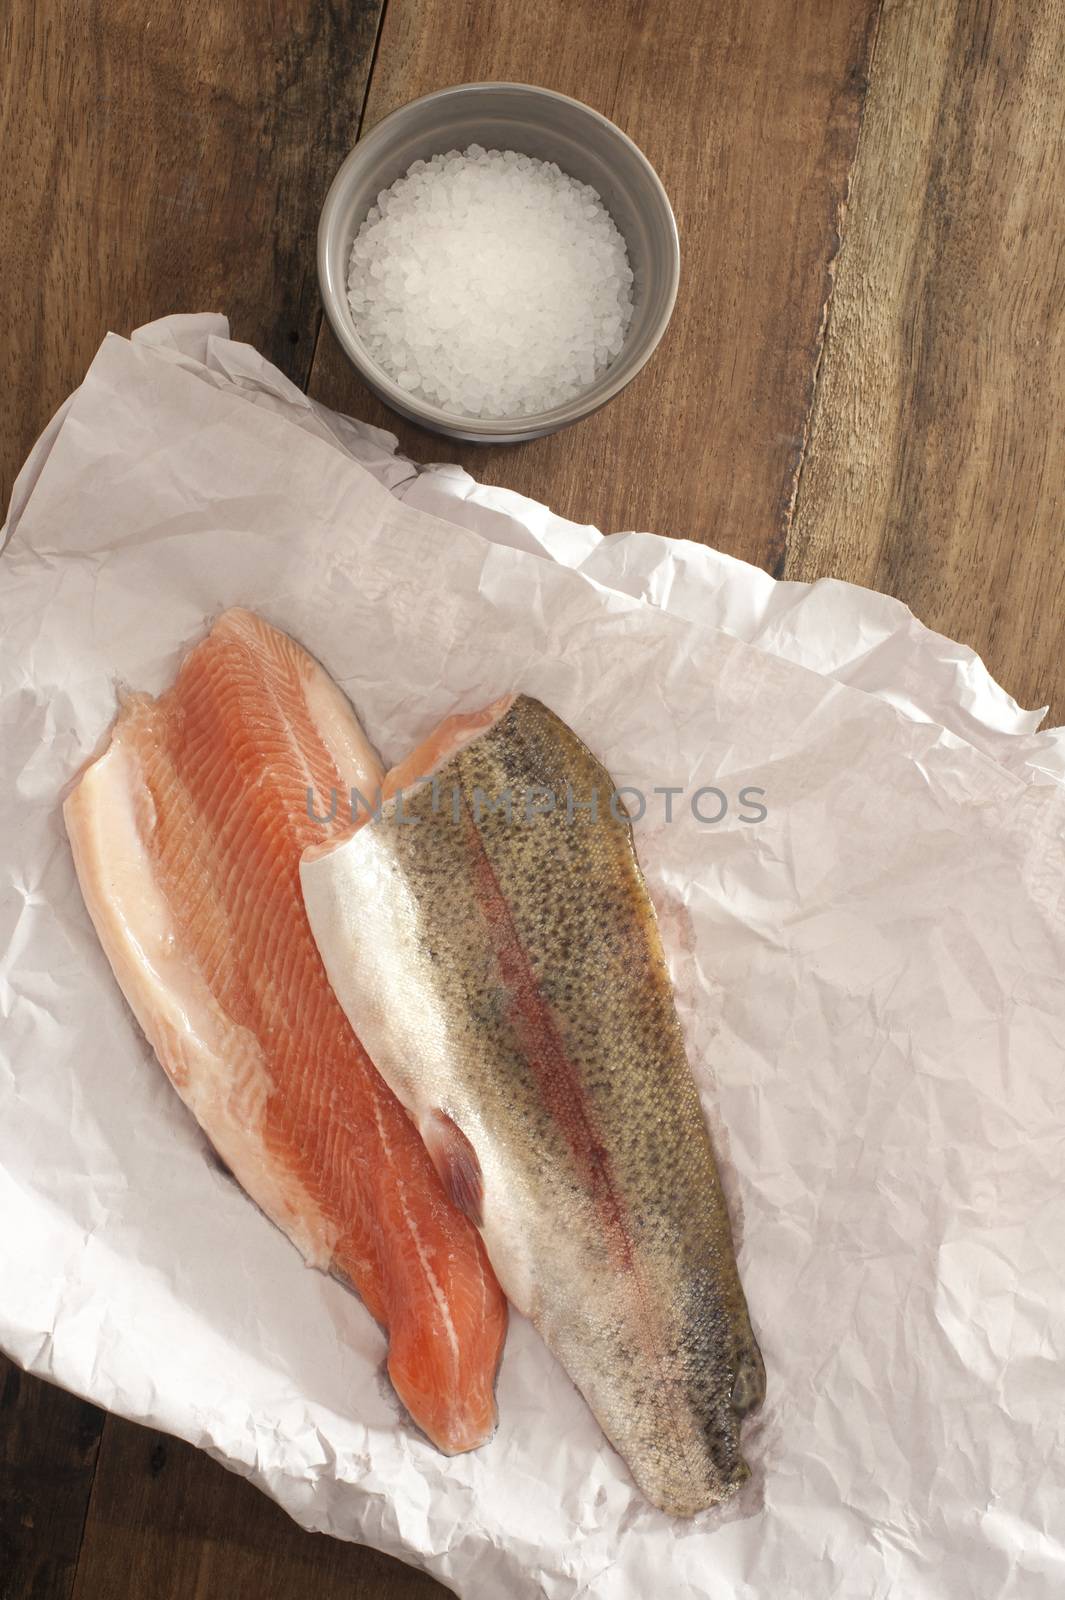 Top View of Fresh Rainbow Trout Meat on a Paper Placed on Wooden Table with Rock Salt on a Saucer.